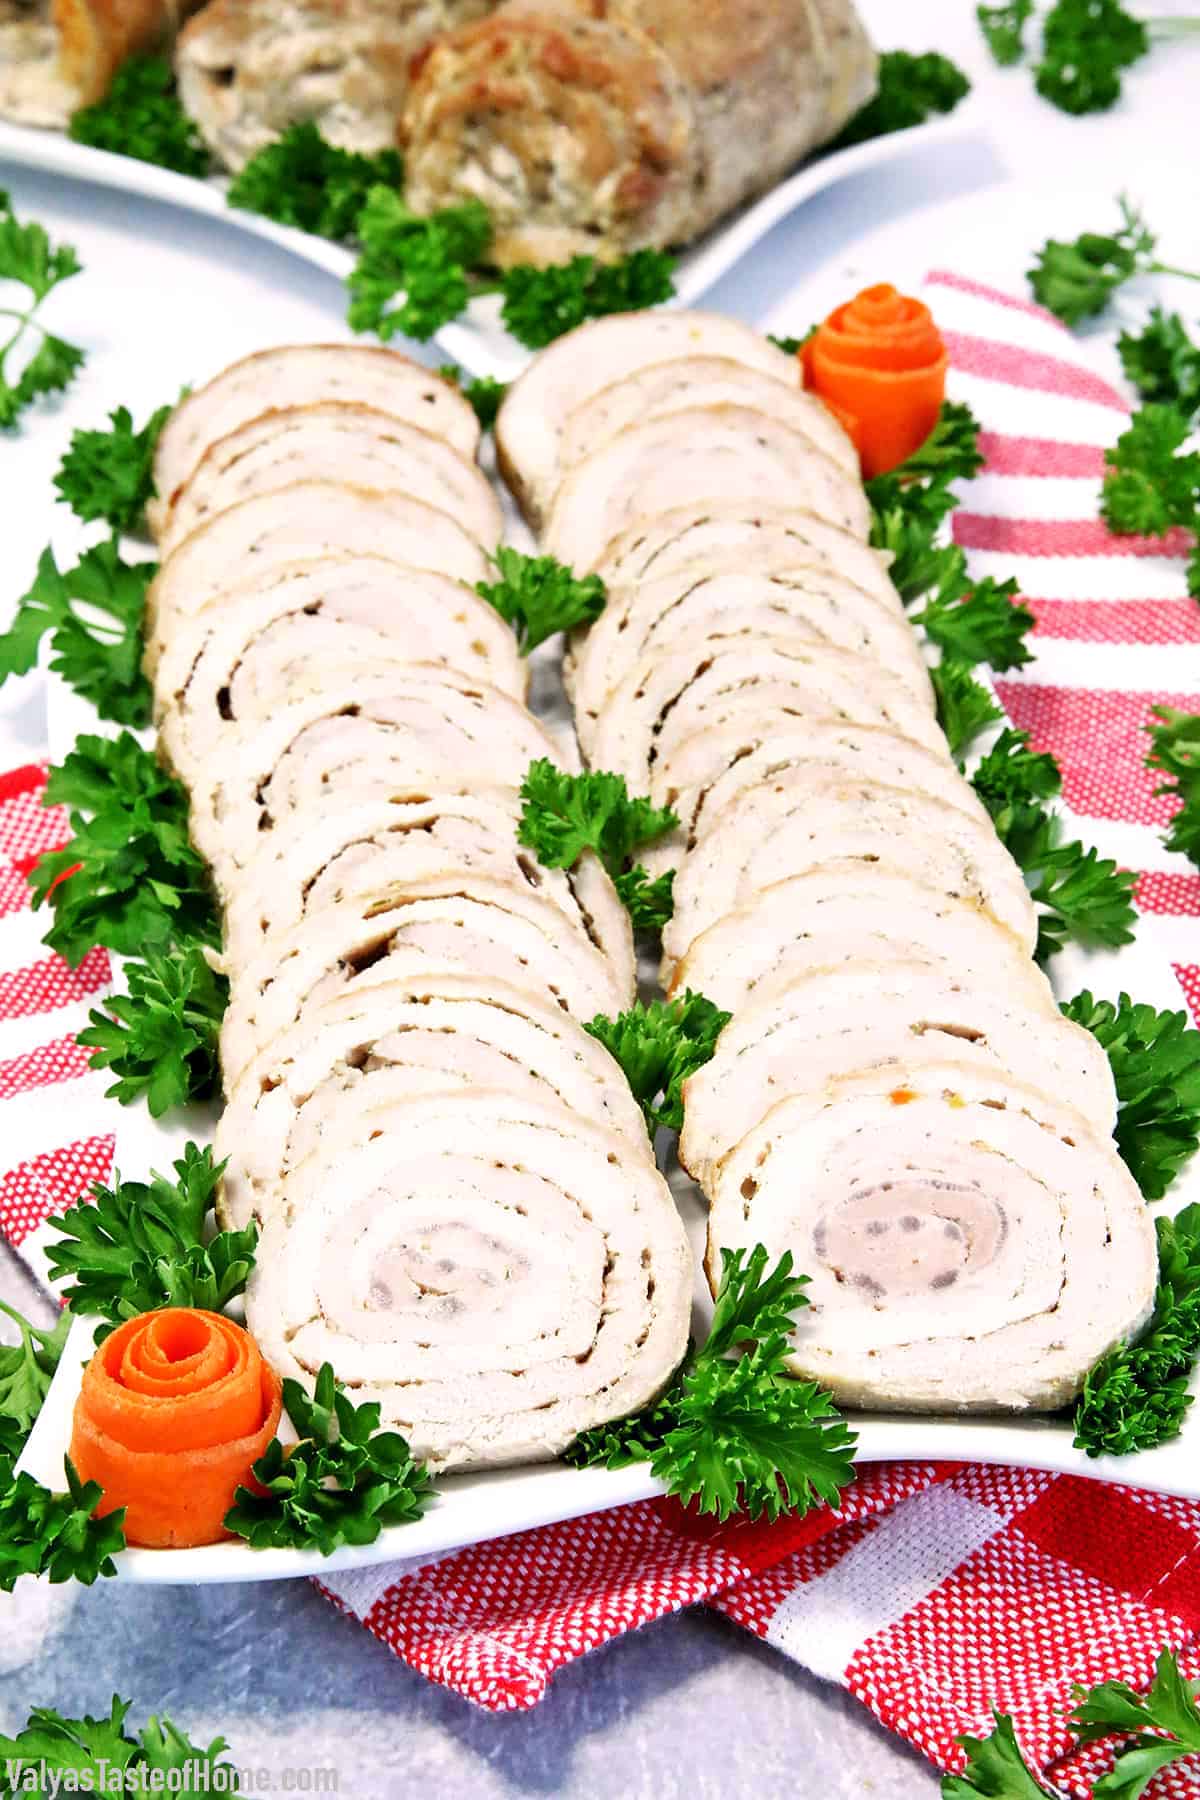 This Pork Meat Roulette is a fairly special traditional recipe that is usually passed down in the family and mostly brought out for special occasions. It is unique, scrumptious, and perfect for your Christmas dinner! 